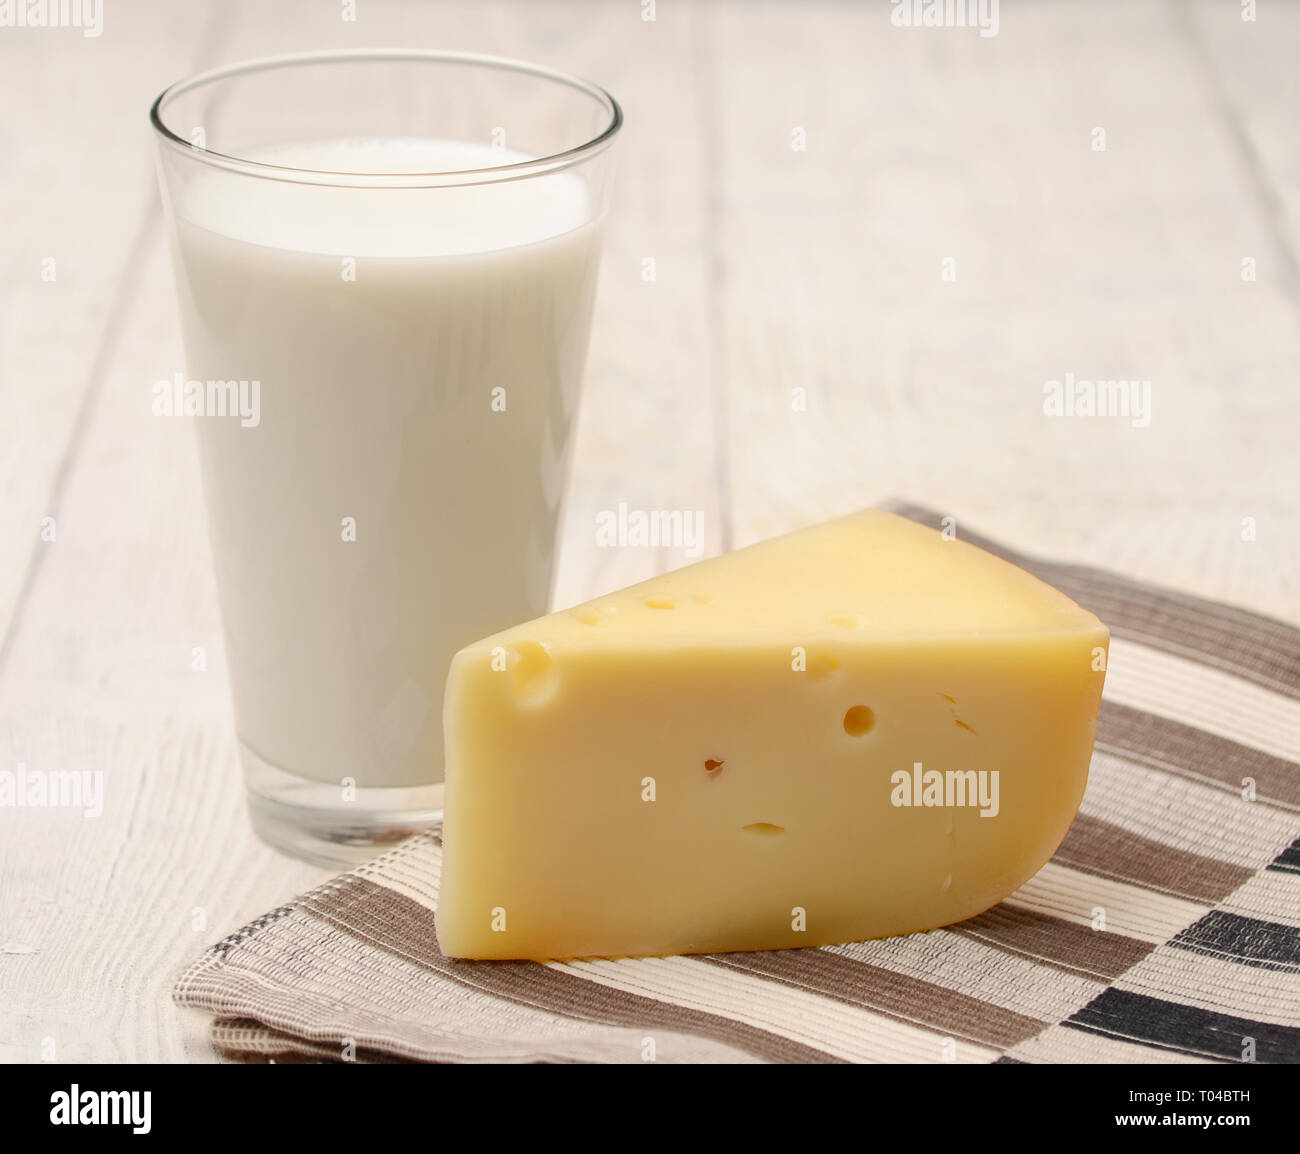 A glass of milk and a piece of cheese on the old table Stock Photo